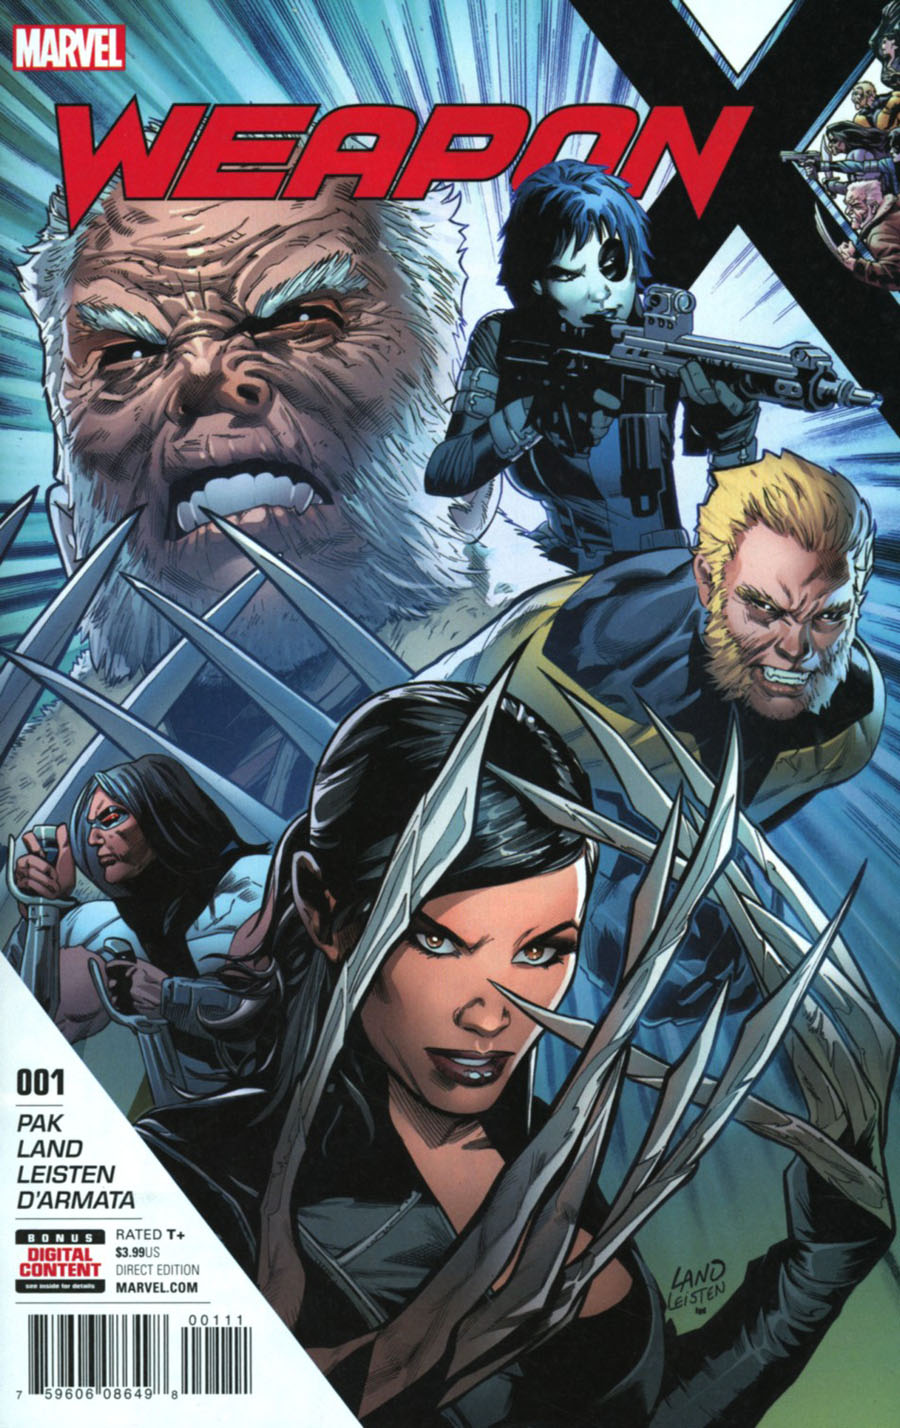 Weapon X Vol 3 #1 Cover A 1st Ptg Regular Greg Land Cover (Resurrxion Tie-In)